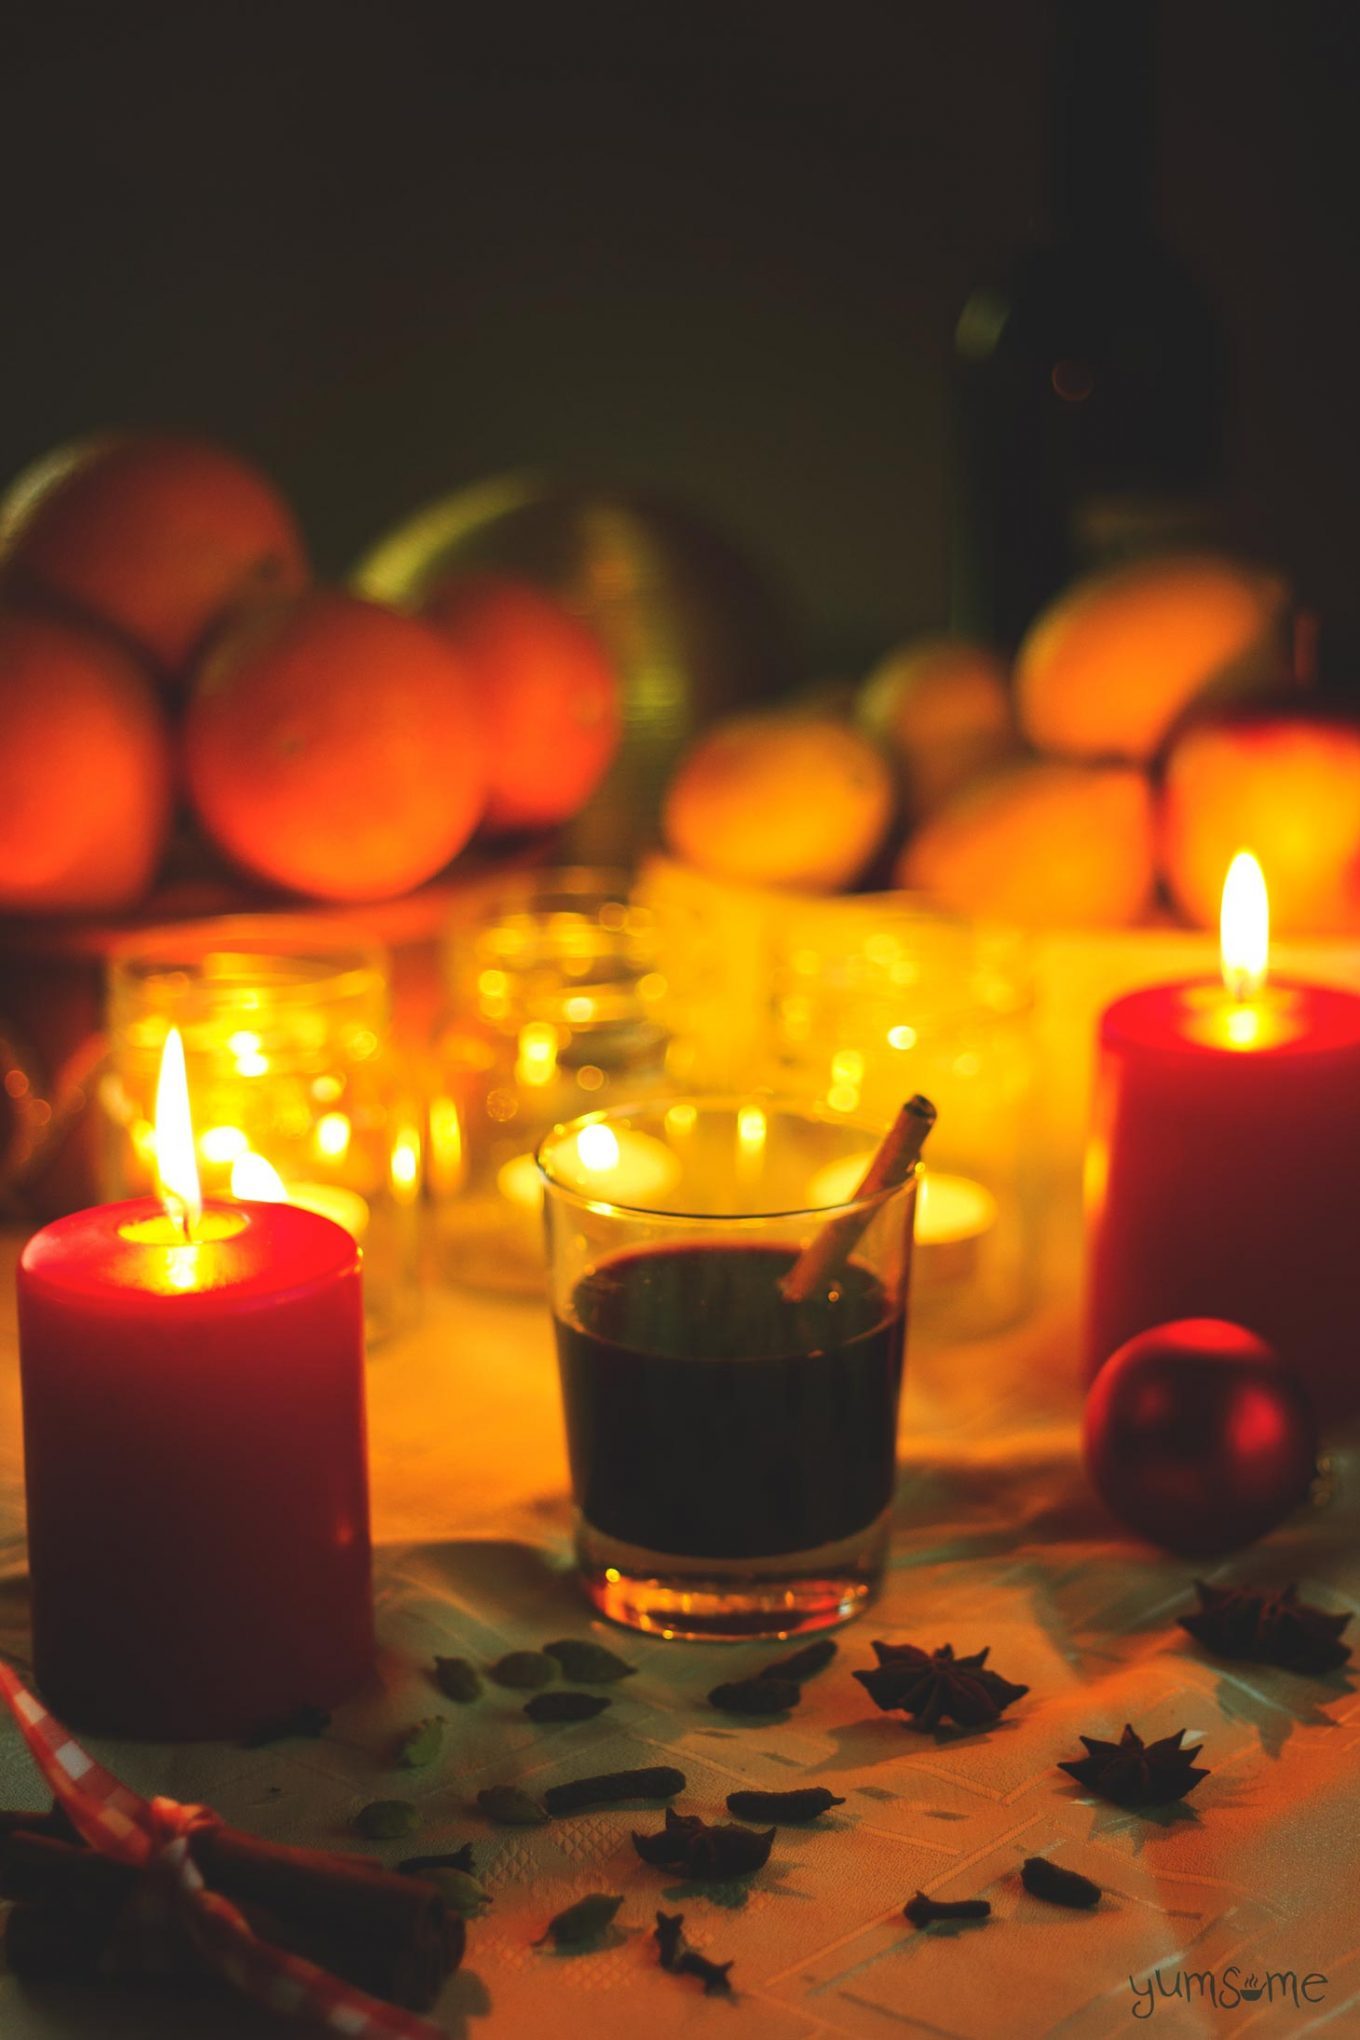 Candlelit glasses of mulled wine, with seasonal fruits in the background.